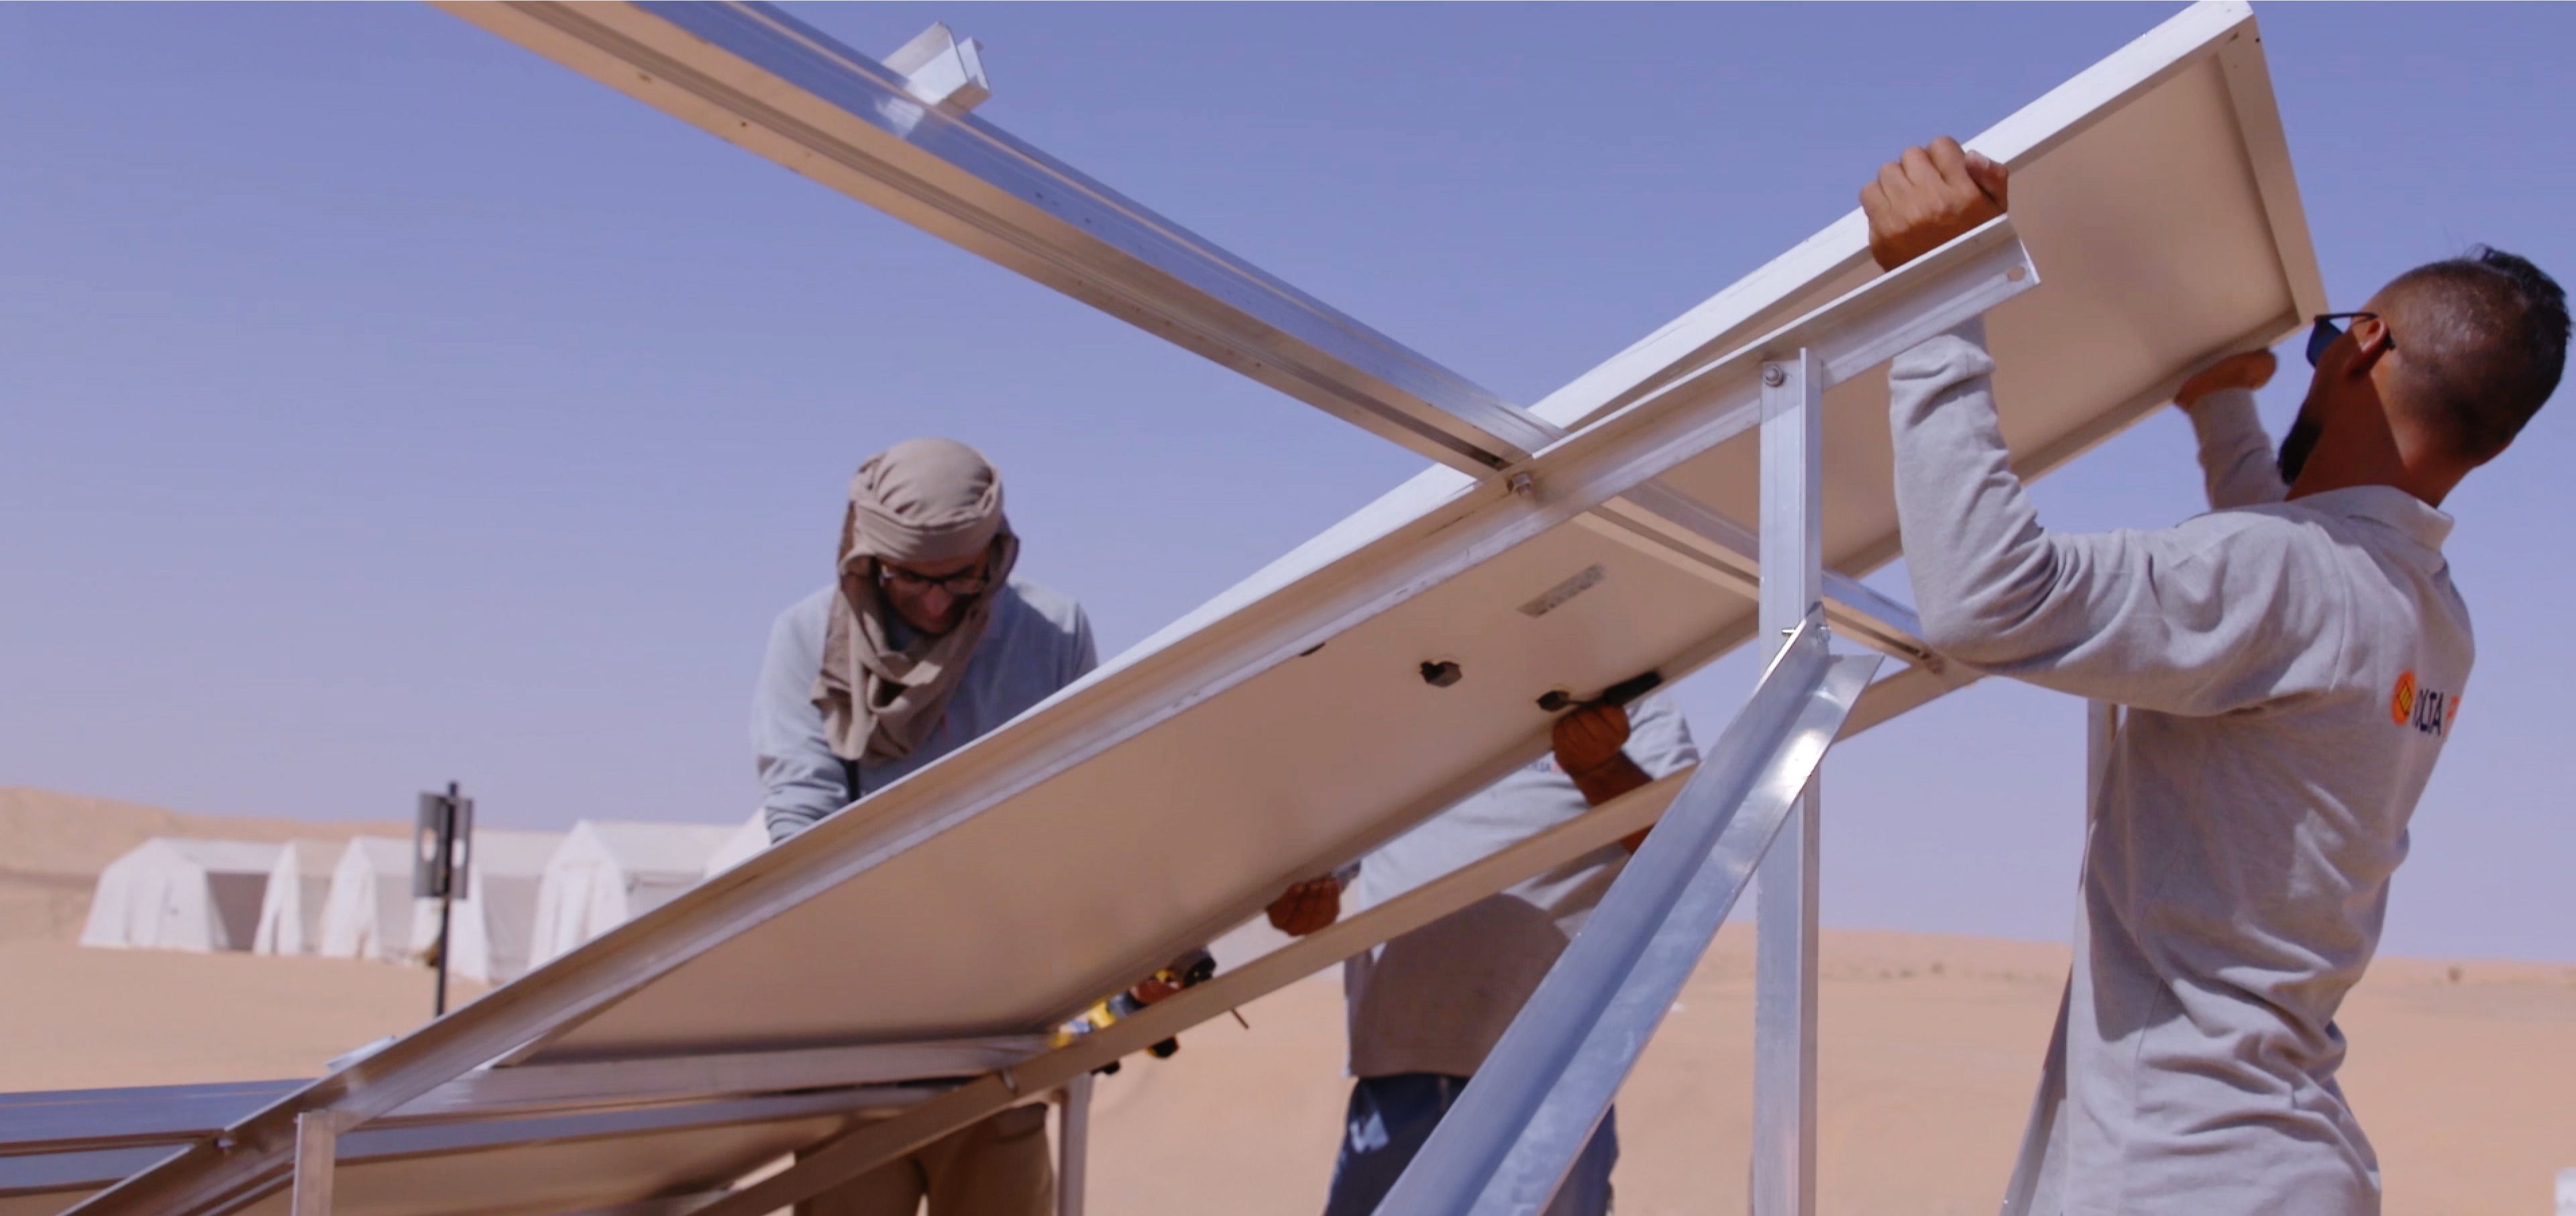 Workers building a solar panel for drinking water production.